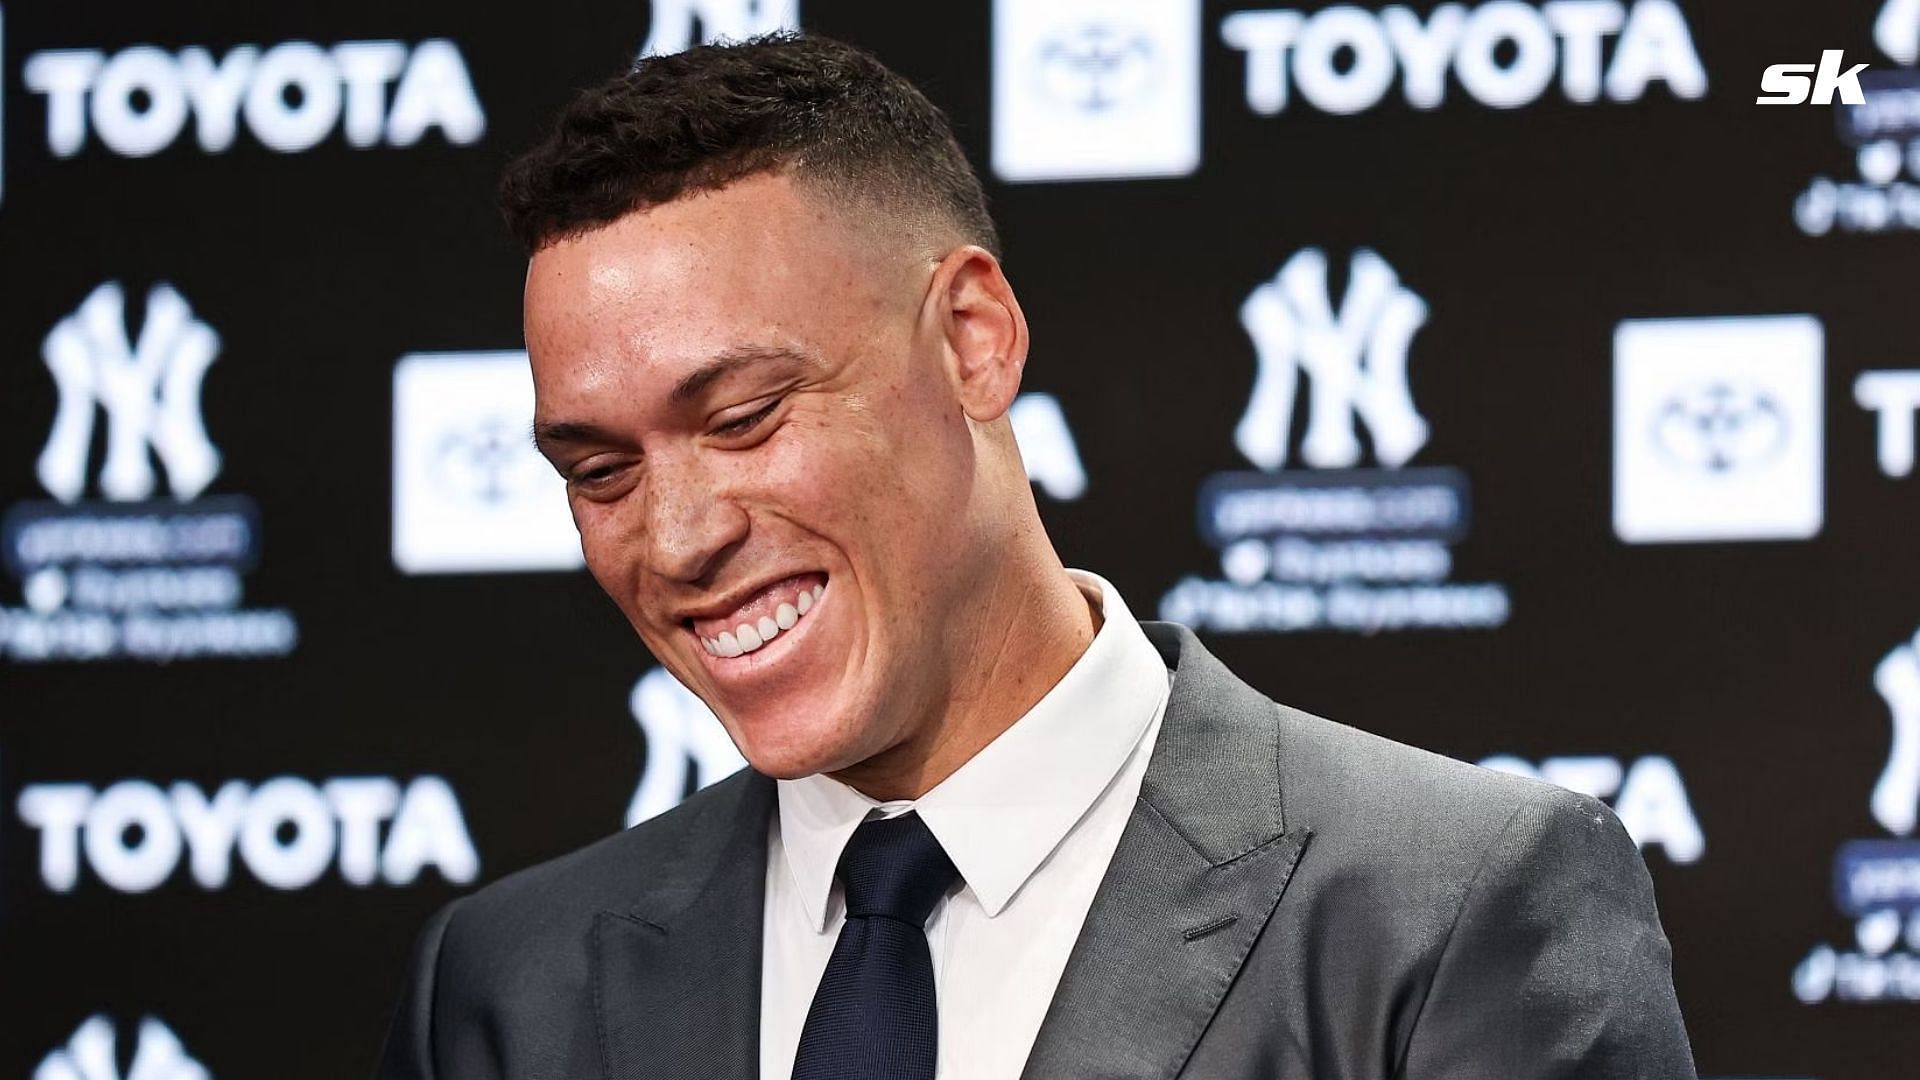 Aaron Judge flaunted a coveted Rolex watch at New York Yankees press conference following his $360M contract